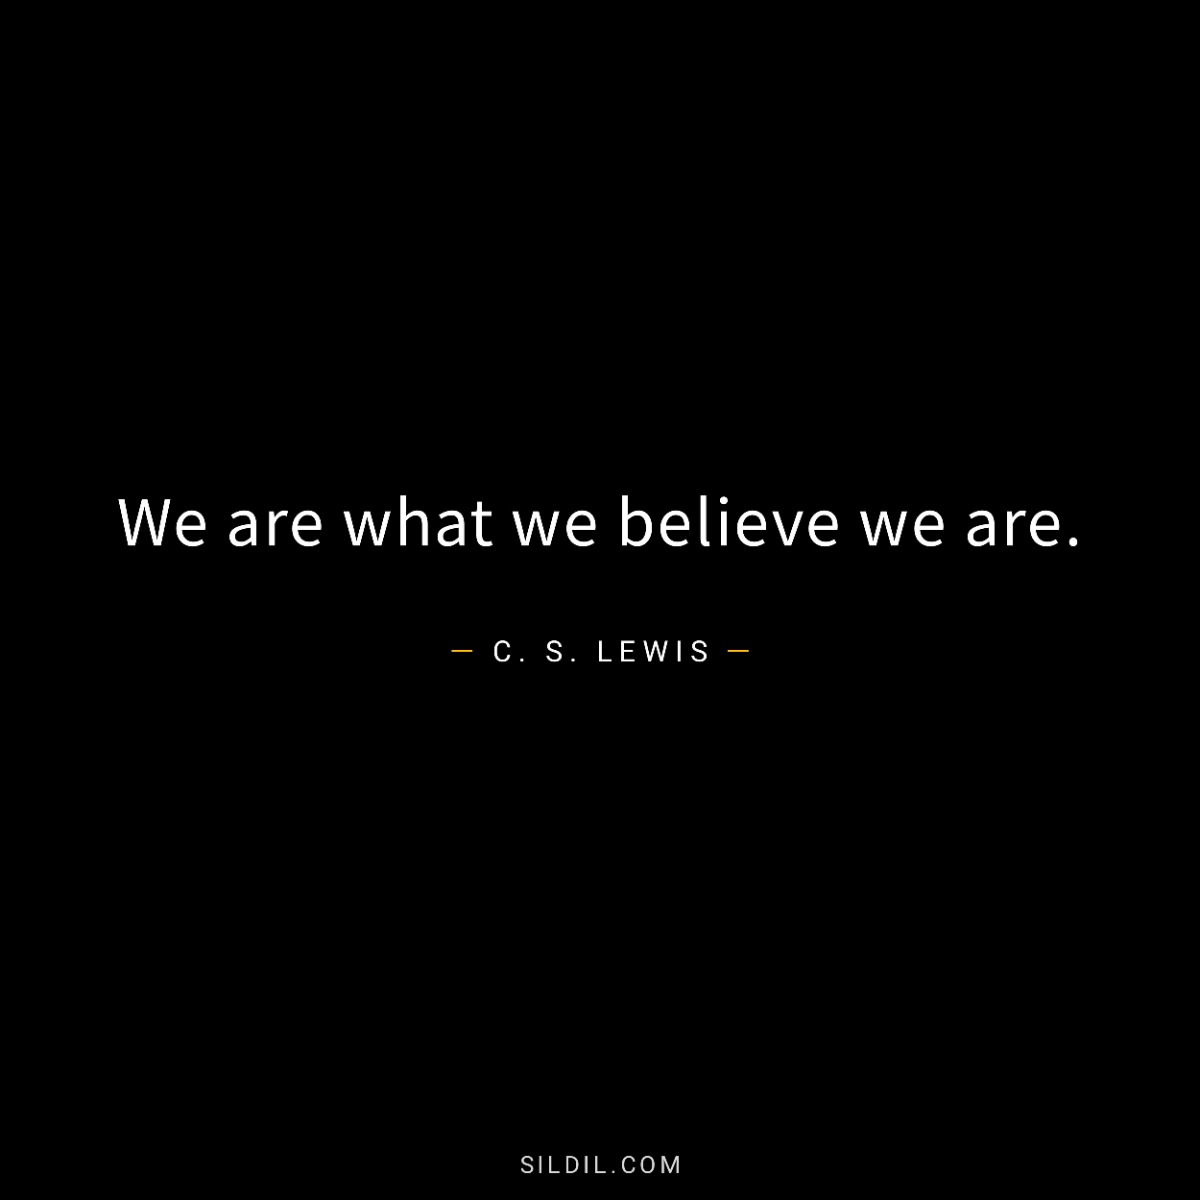 We are what we believe we are.